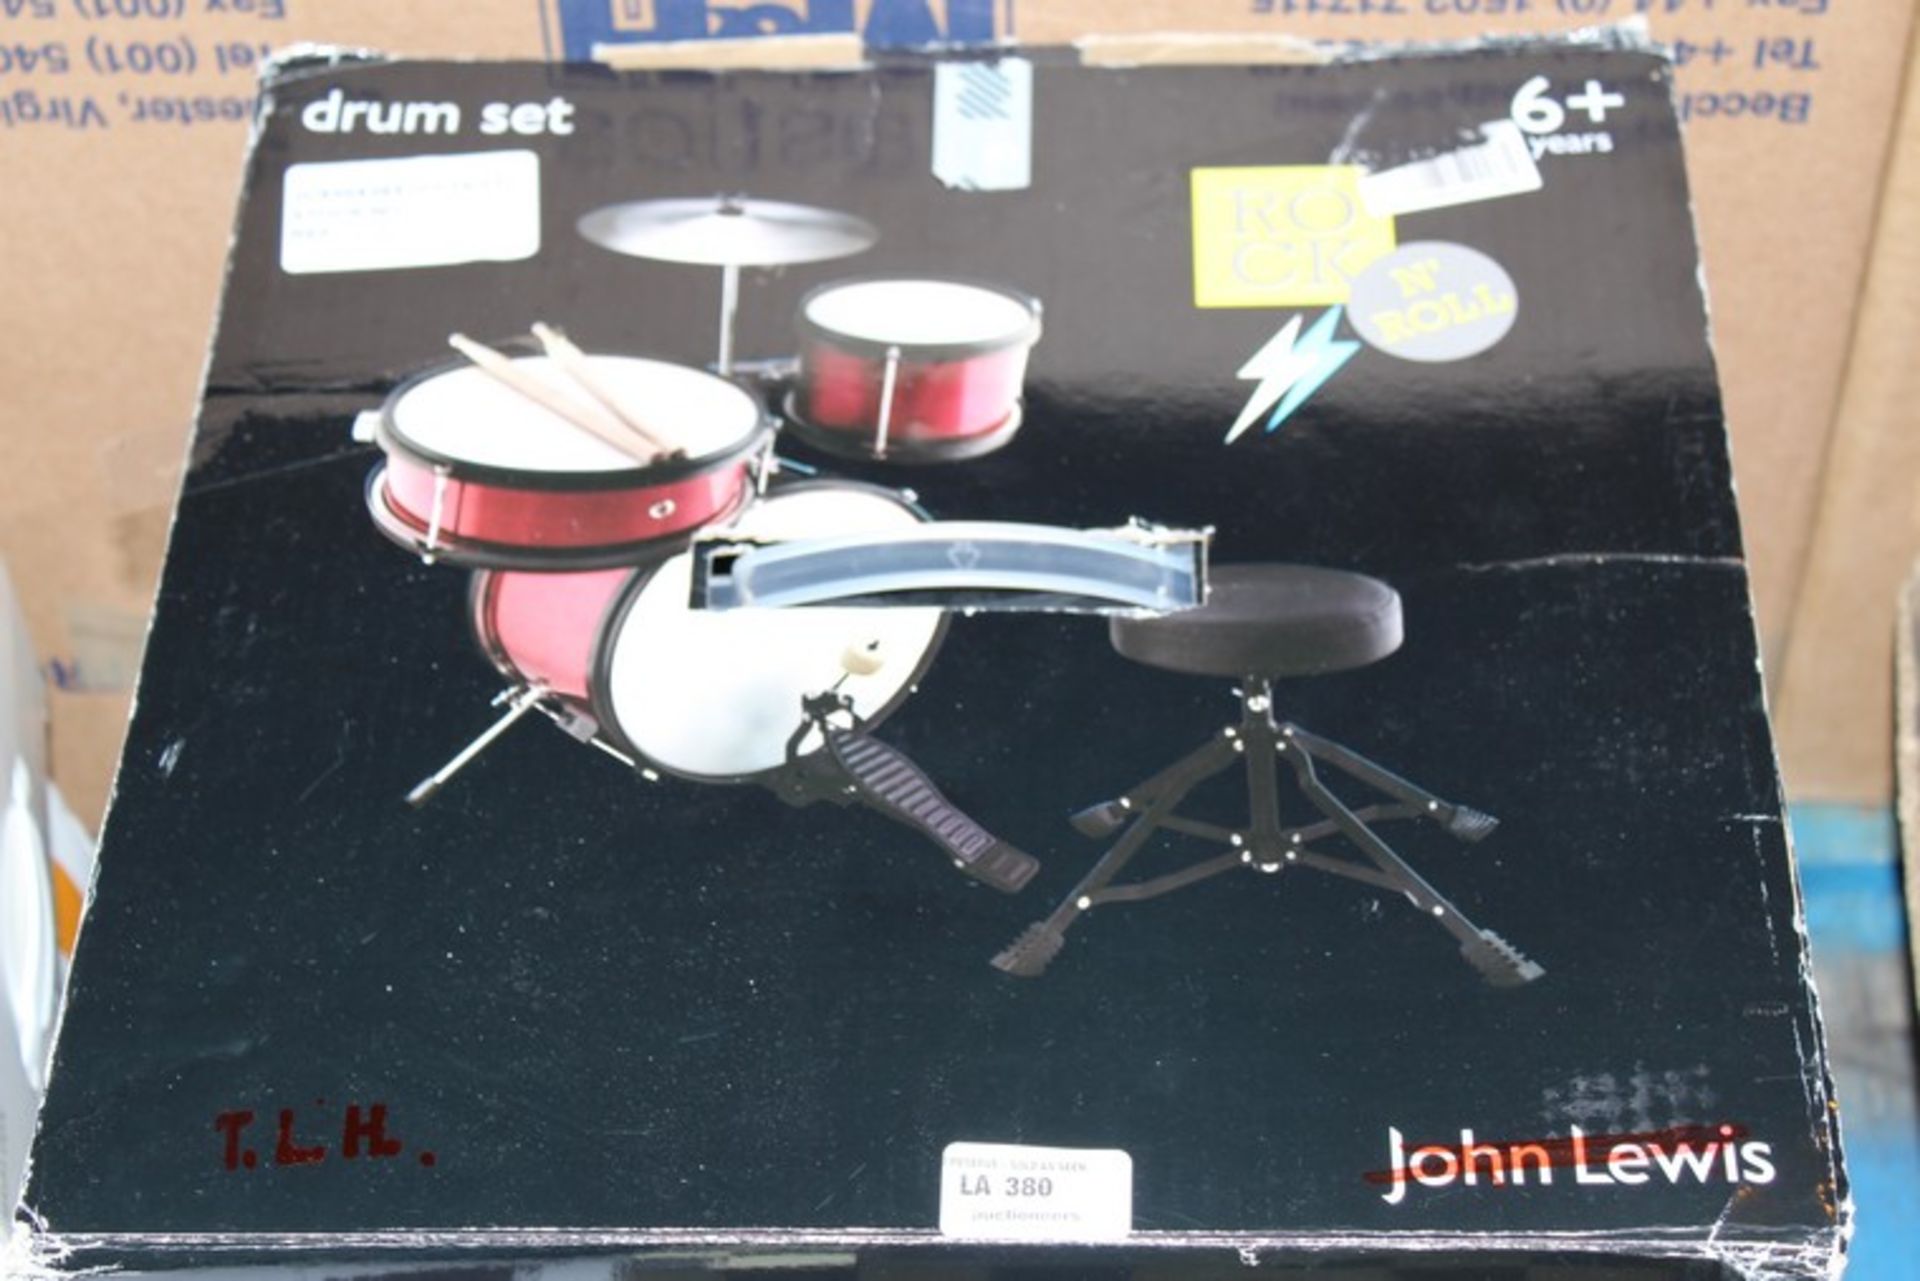 1 x BOXED CHILDRENS DRUM SET RRP £70 (17.10.17) *PLEASE NOTE THAT THE BID PRICE IS MULTIPLIED BY THE